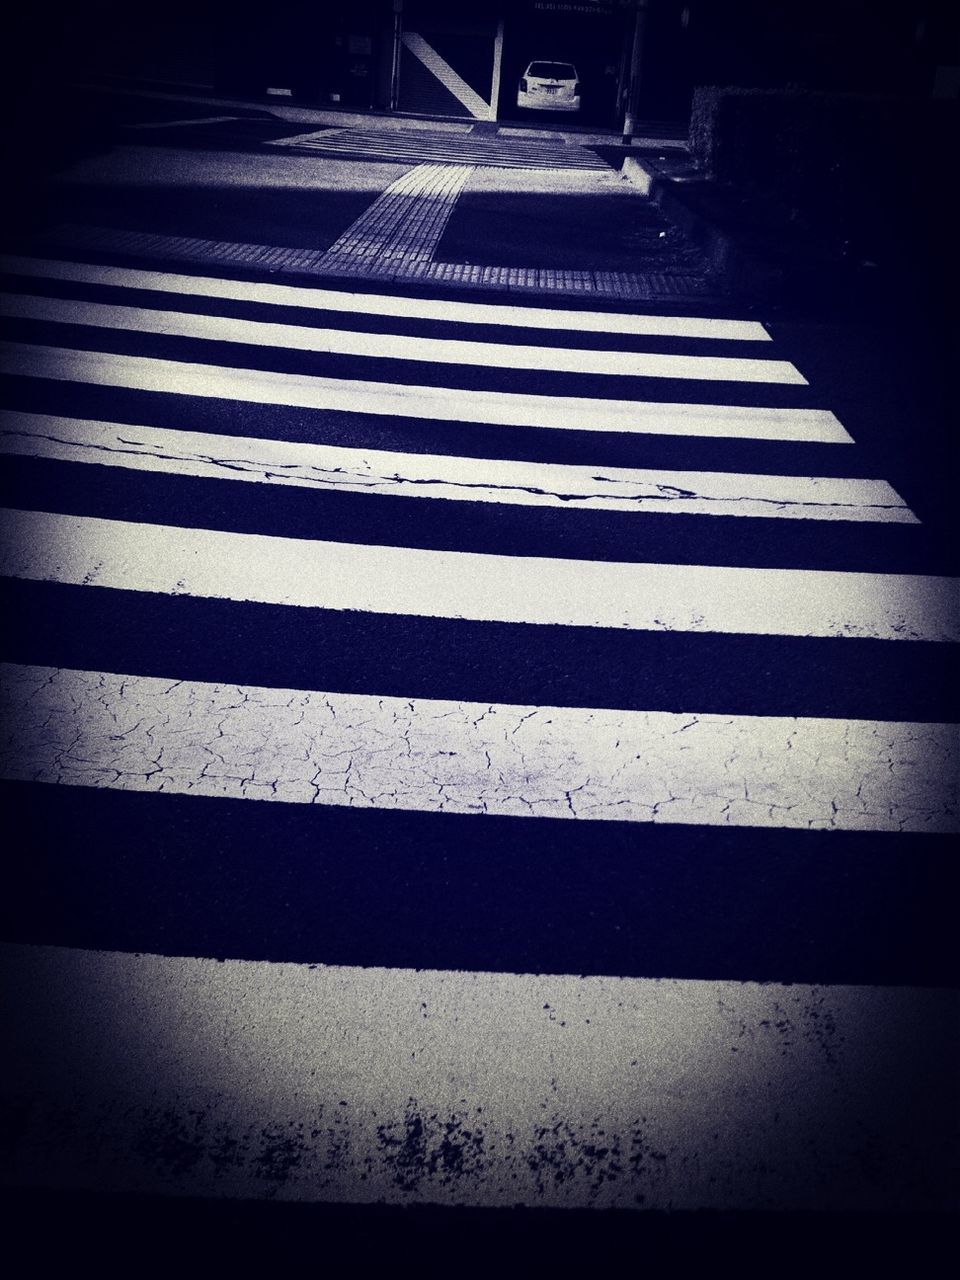 road marking, street, the way forward, road, asphalt, high angle view, shadow, zebra crossing, steps, transportation, empty, striped, sunlight, outdoors, day, no people, diminishing perspective, pattern, white color, sidewalk